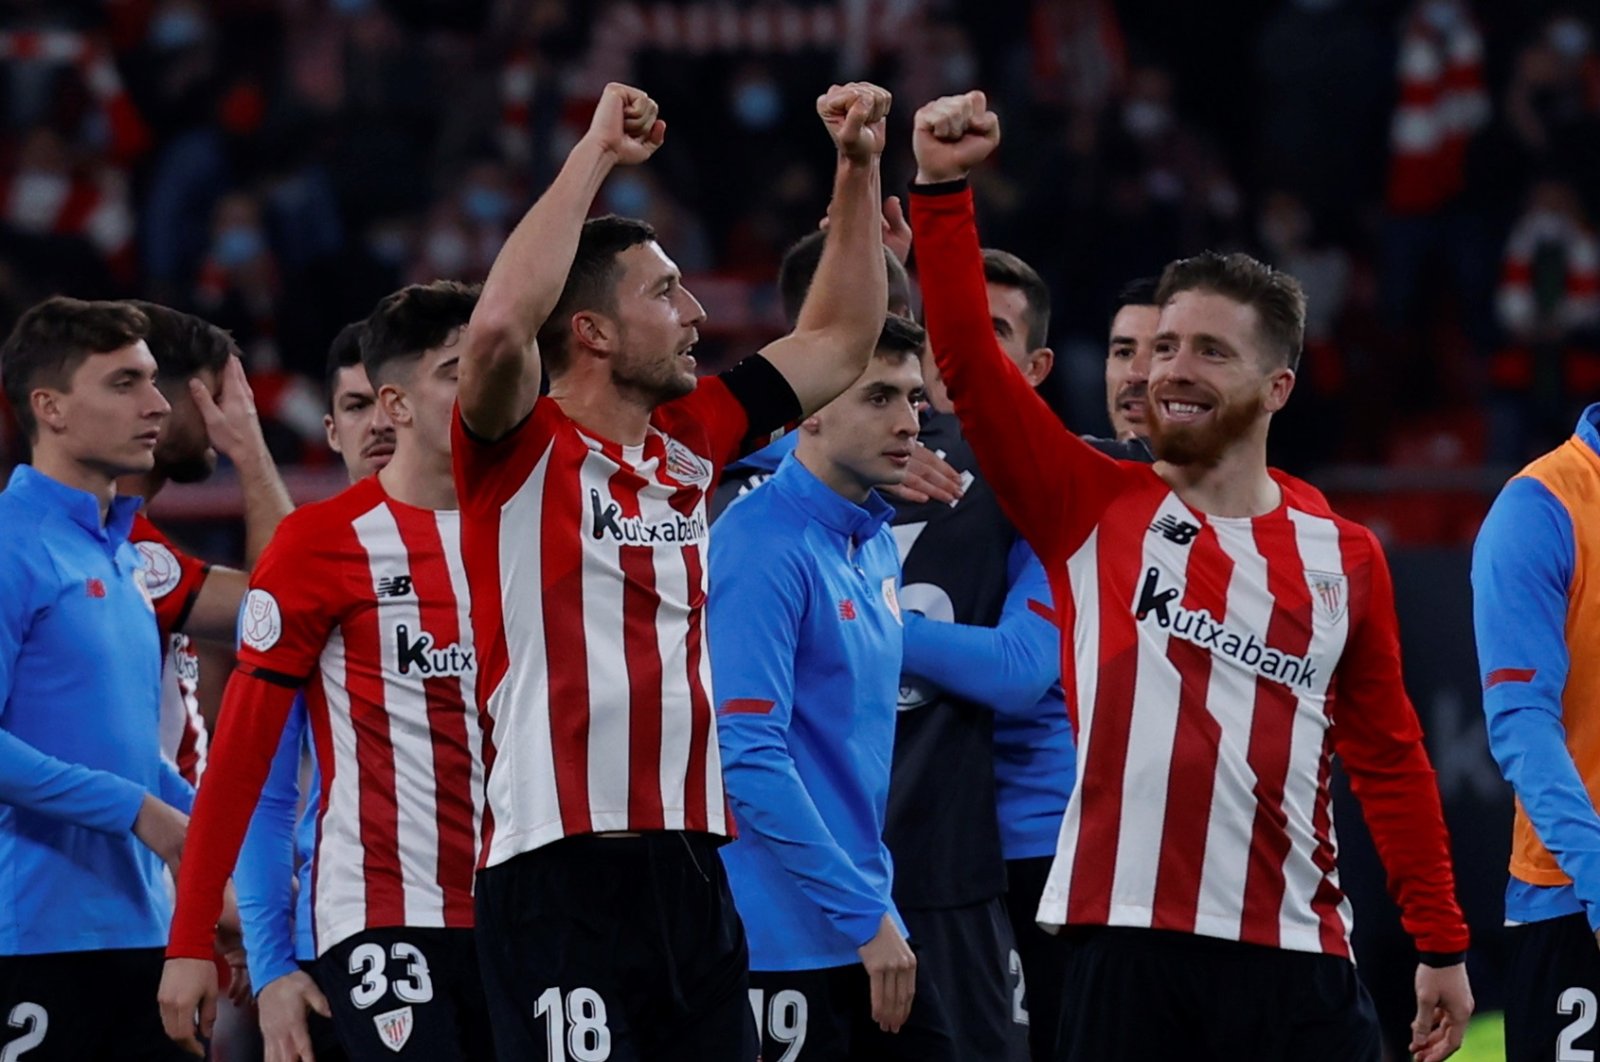 Athletic Bilbao players celebrate their victory against Real Madrid in Copa del Rey quarterfinal, Bilbao, Spain, Feb. 3, 2022. (EPA Photo)